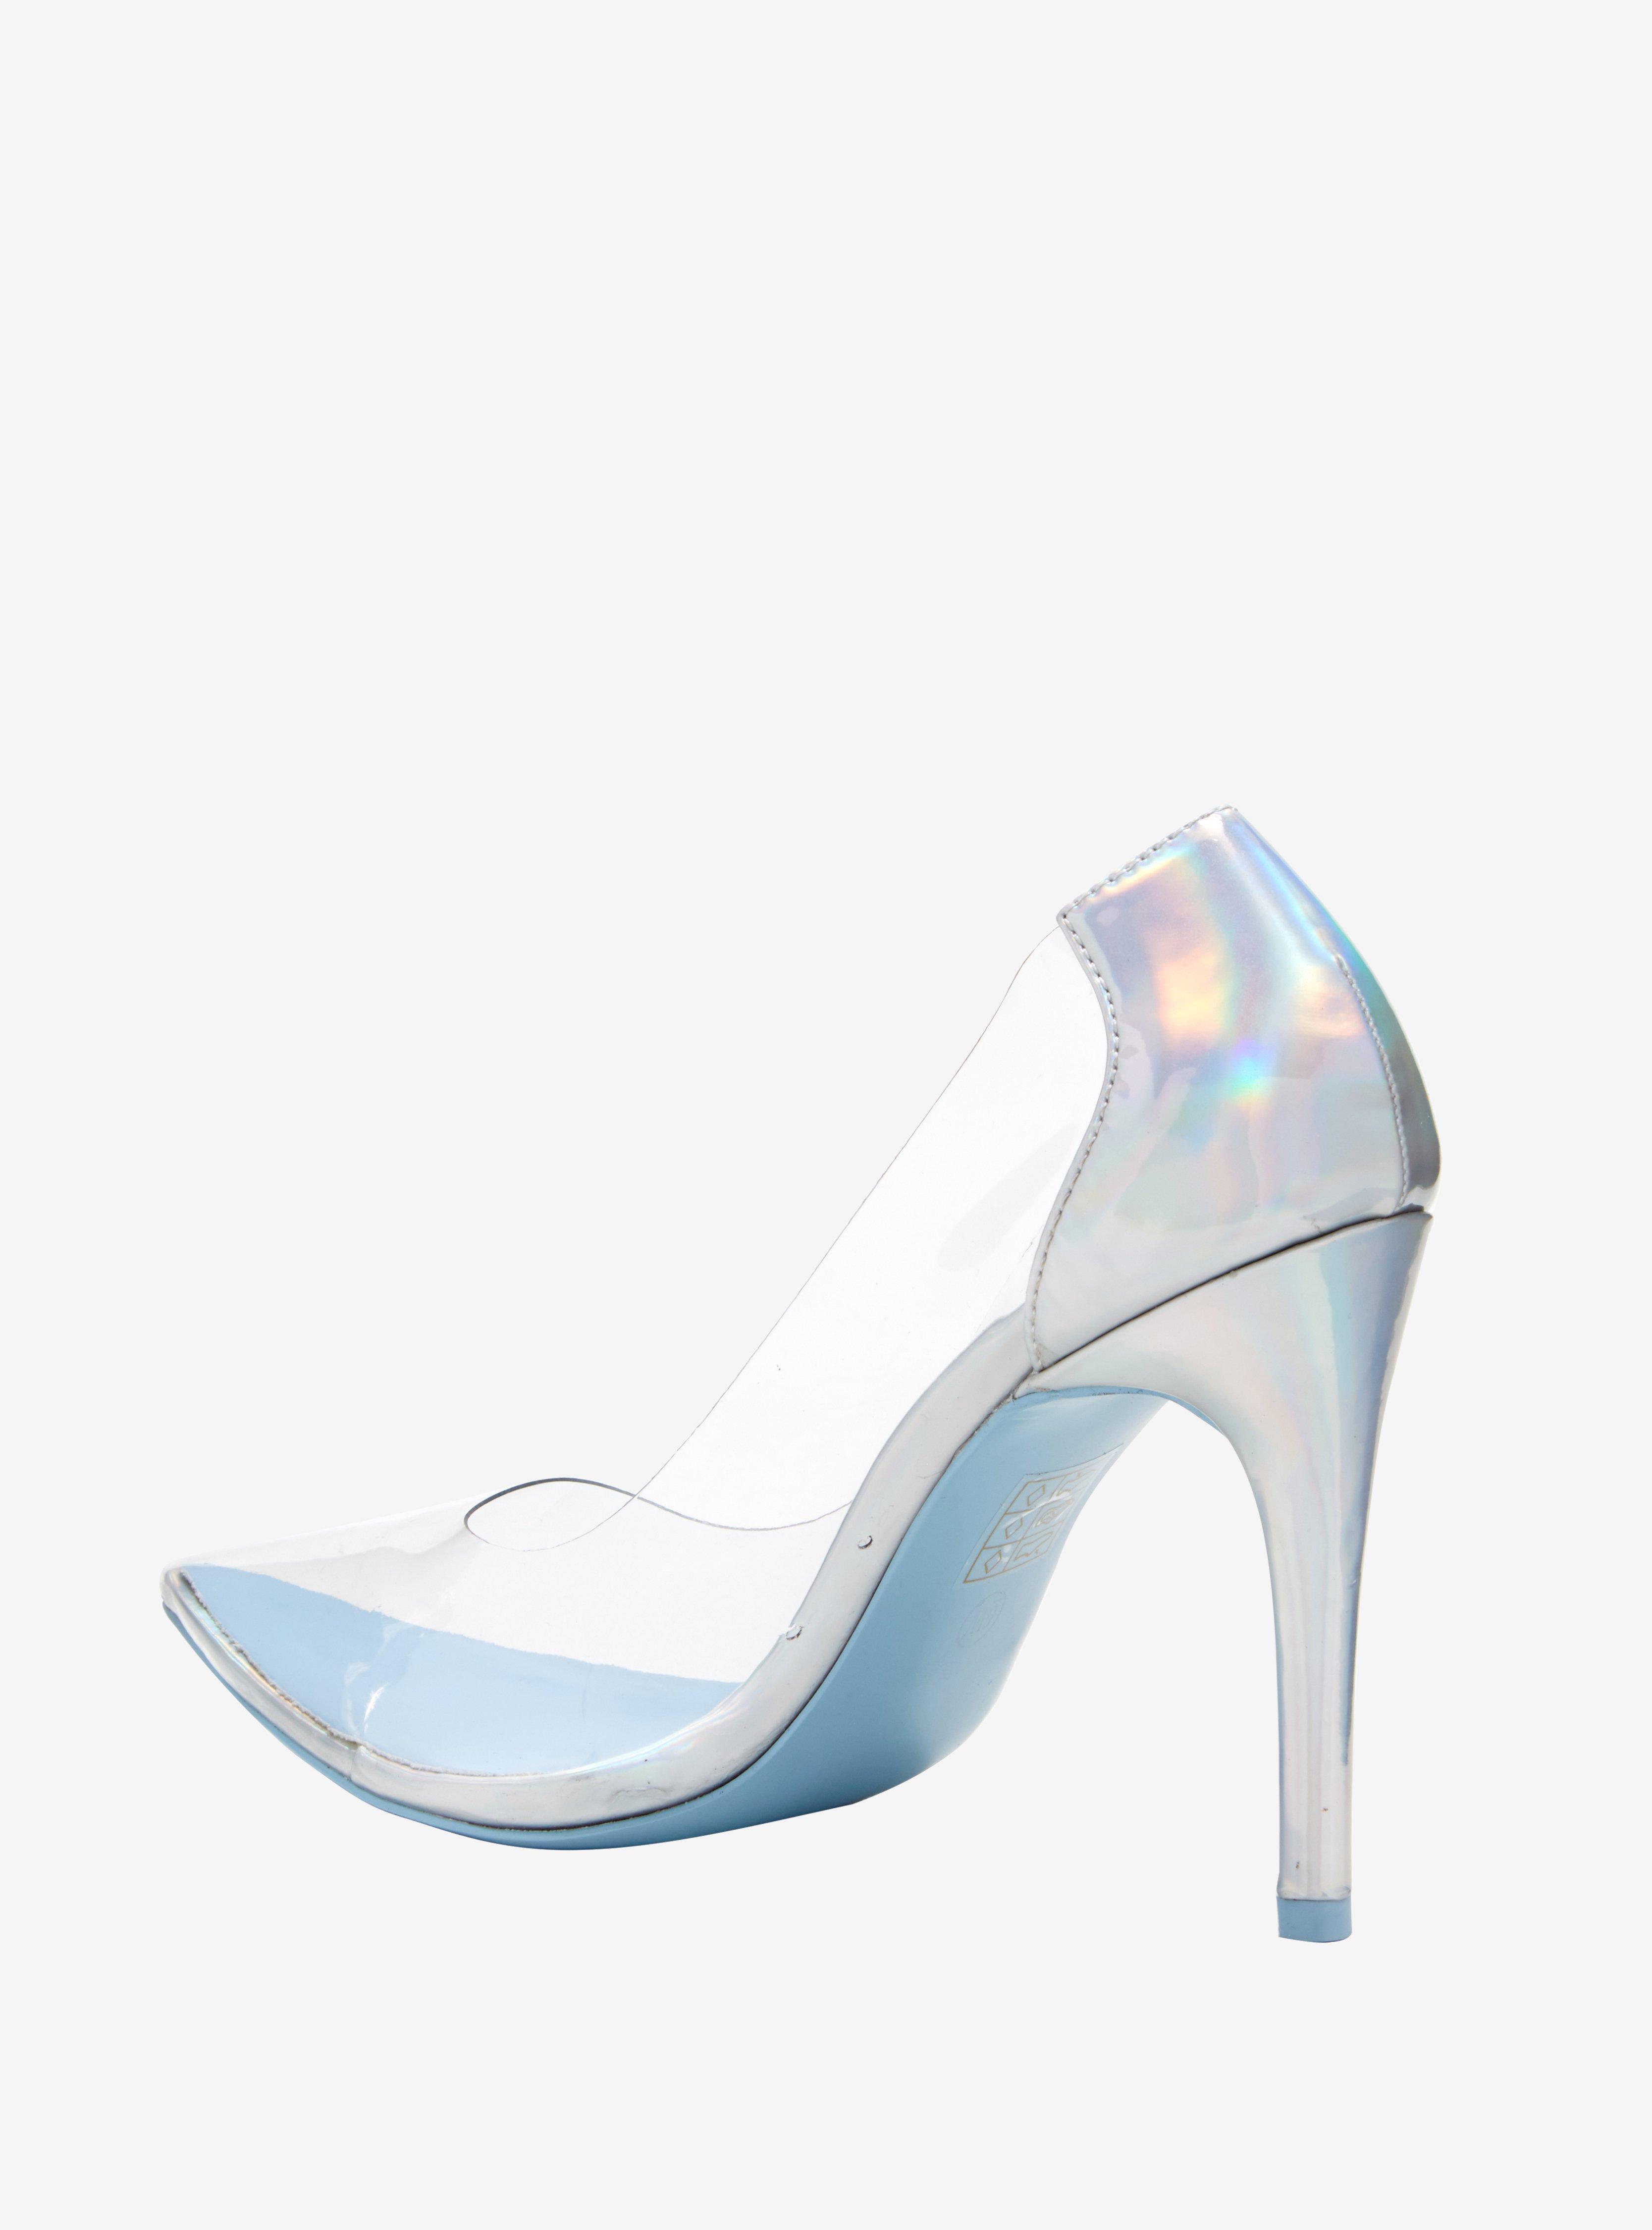 Top Cinderella Glass Slippers/Shoes For Girls and Adults! - HubPages